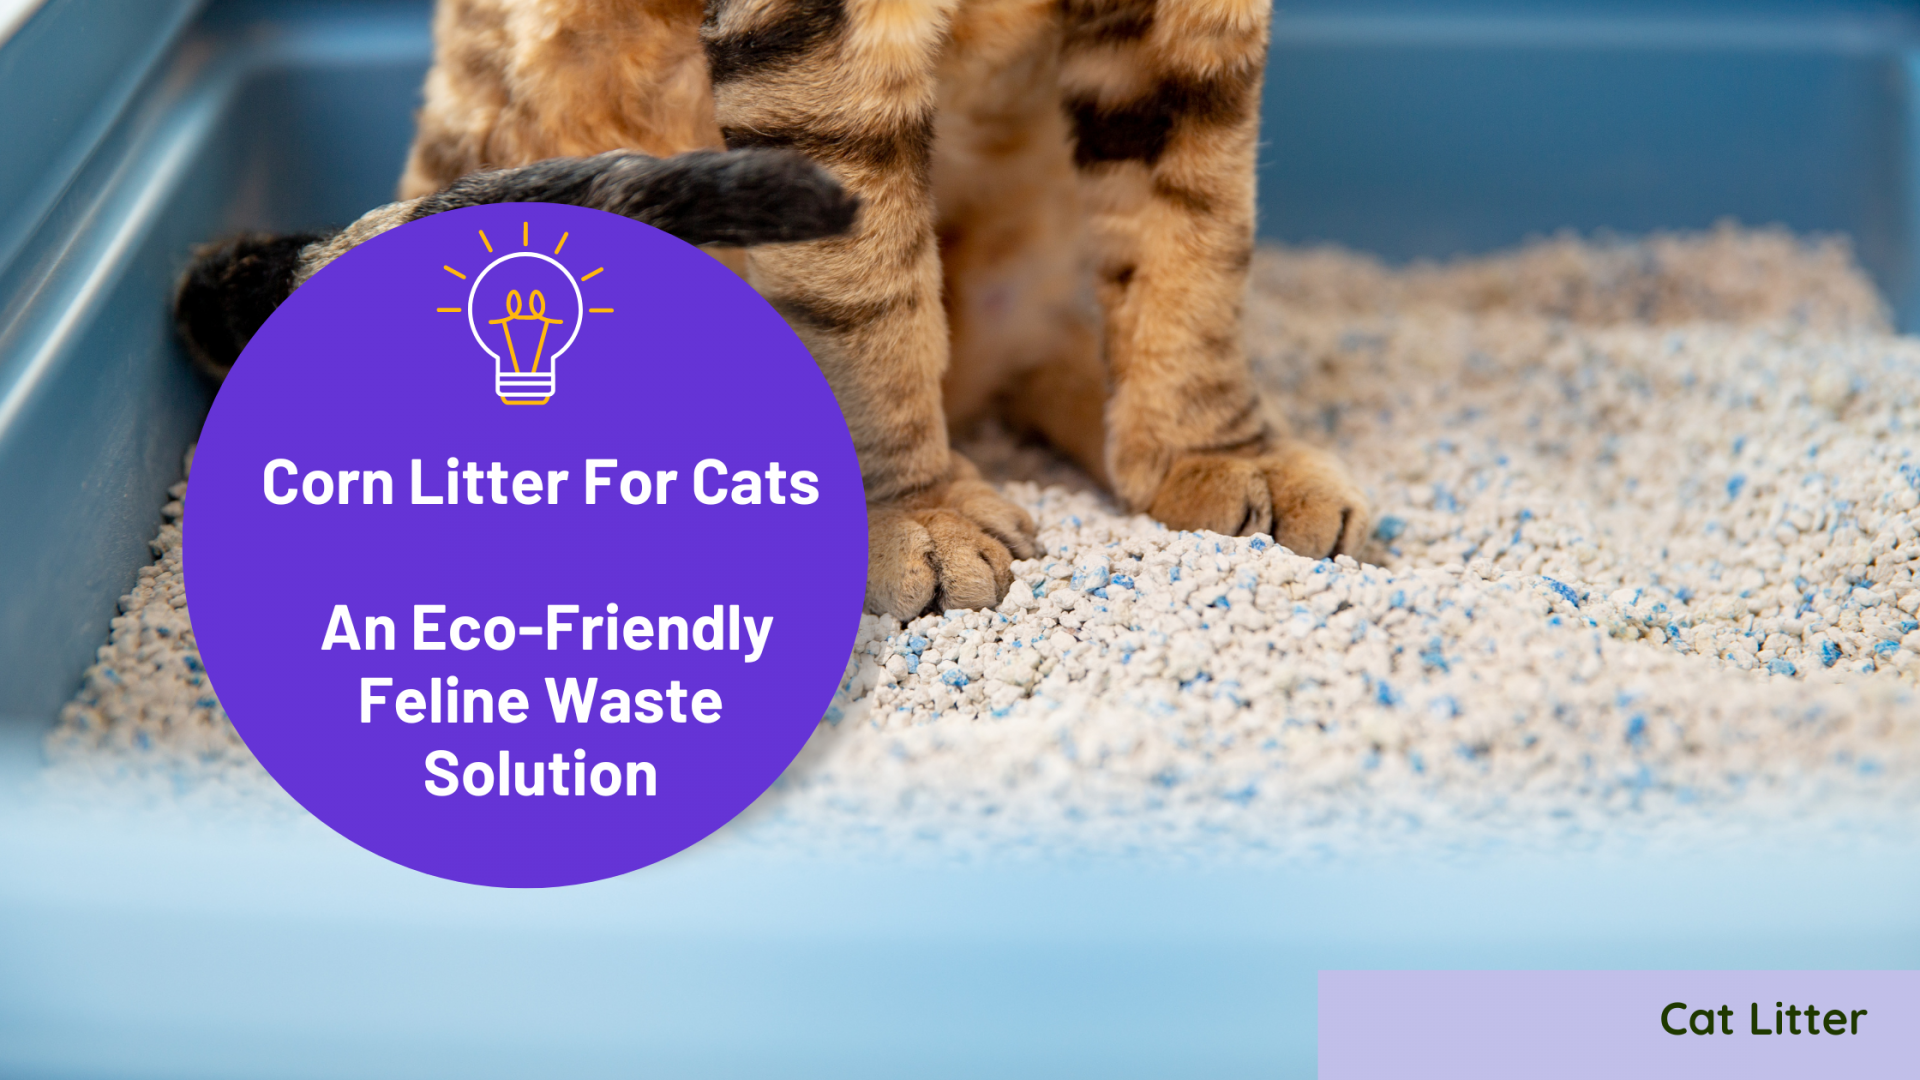 Corn Litter For Cats: An Eco-Friendly Feline Waste Solution